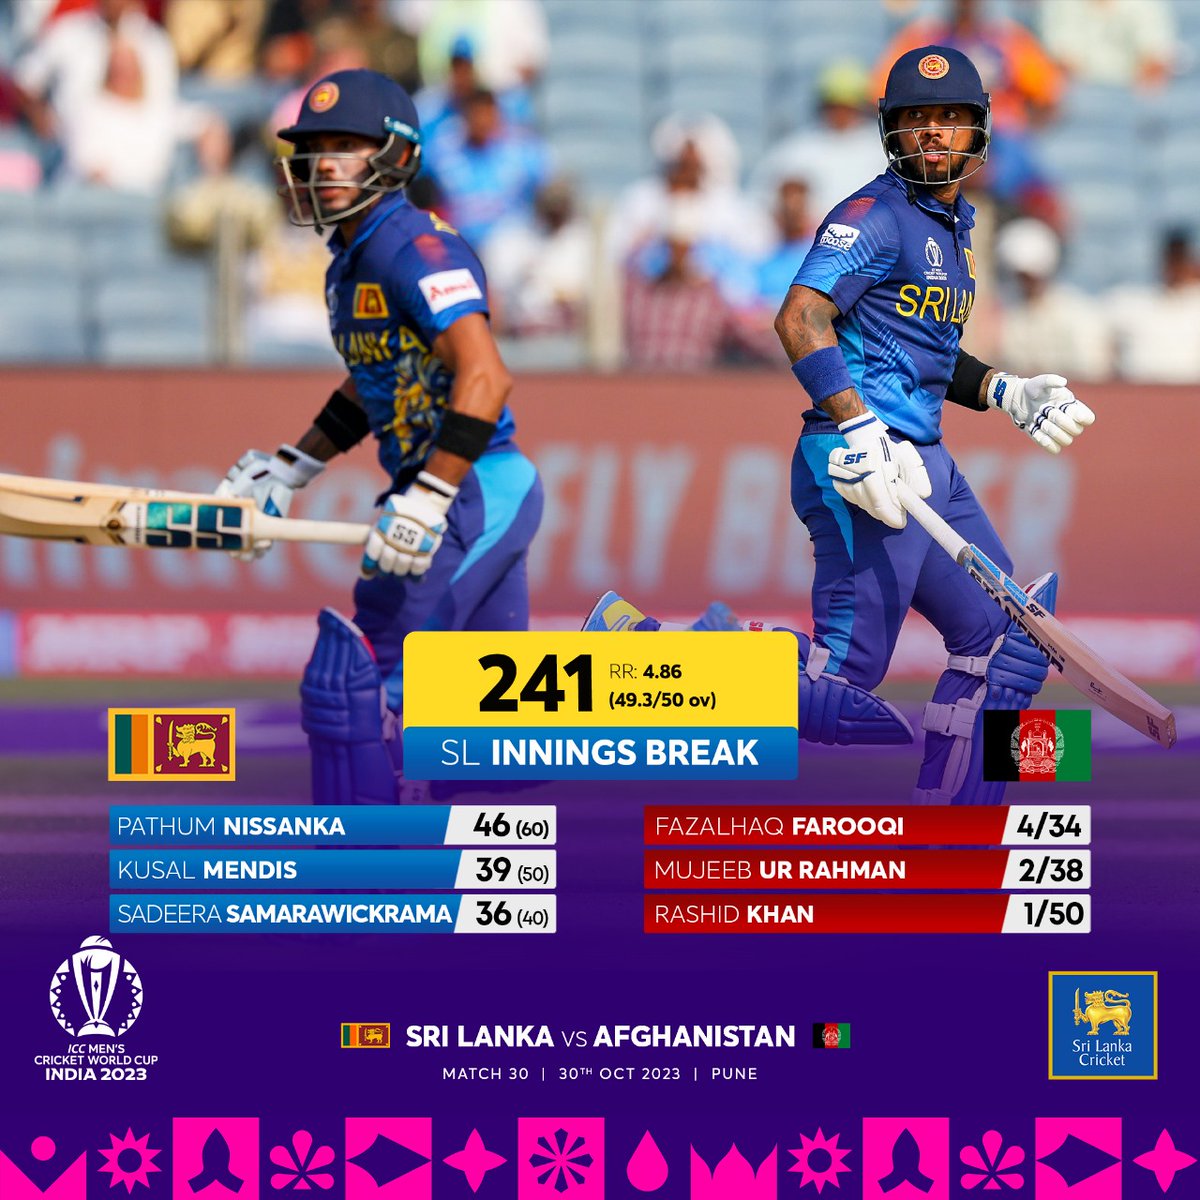 Sri Lanka sets a target of 242. It's time to defend the target with all our might! 👊 

#SLvAFG #LankanLions #CWC23